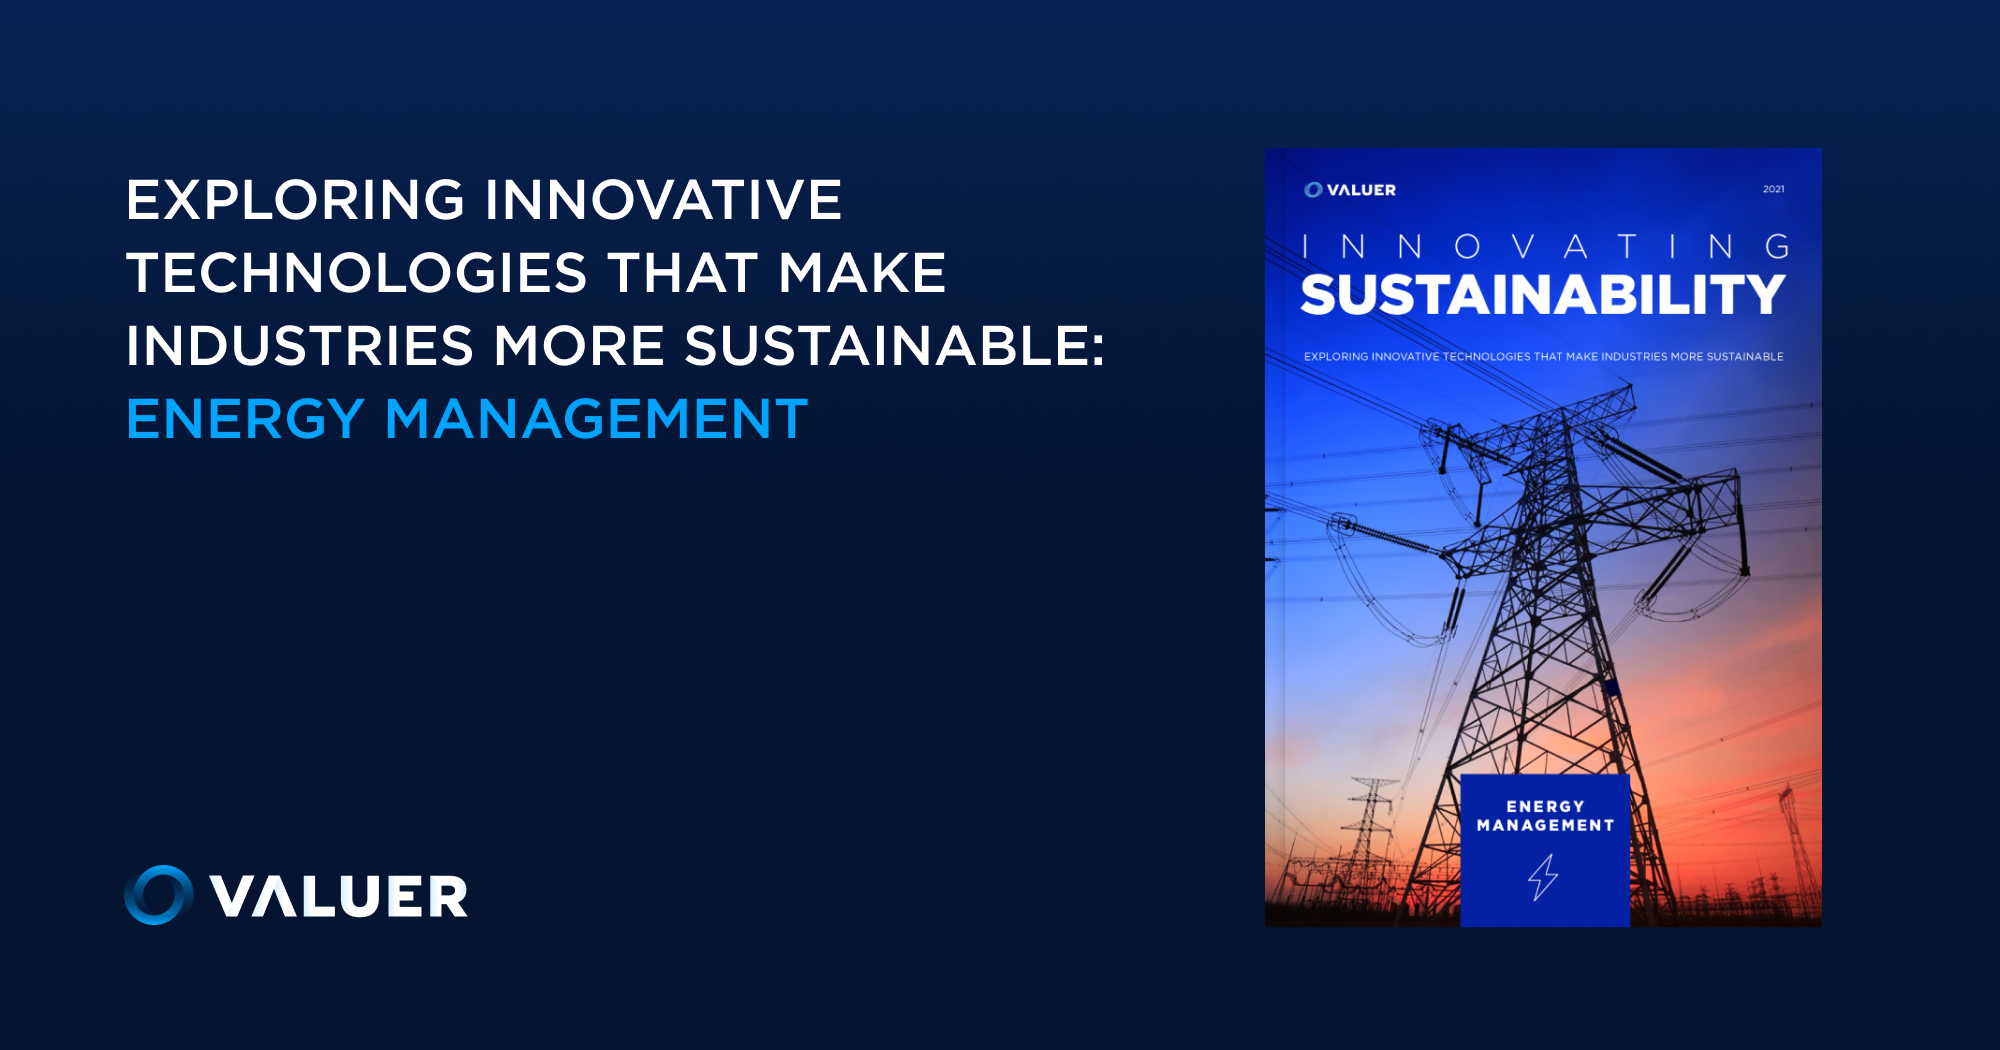 Innovating Sustainability: The Future of Energy Management (Download Report)